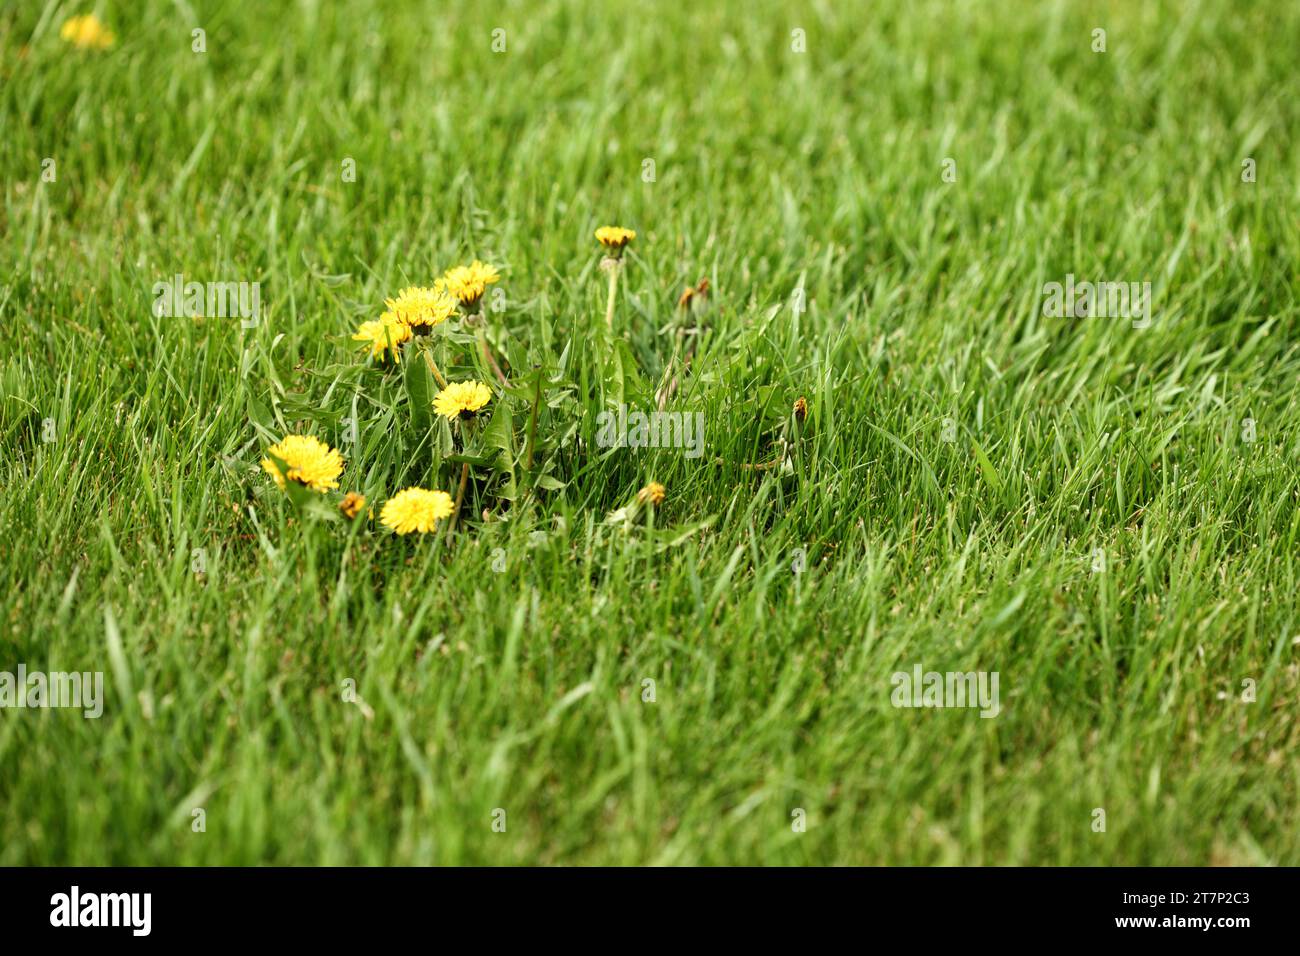 Dandelion weeds Taraxacum officinale, growing in a residential grass lawn. Stock Photo